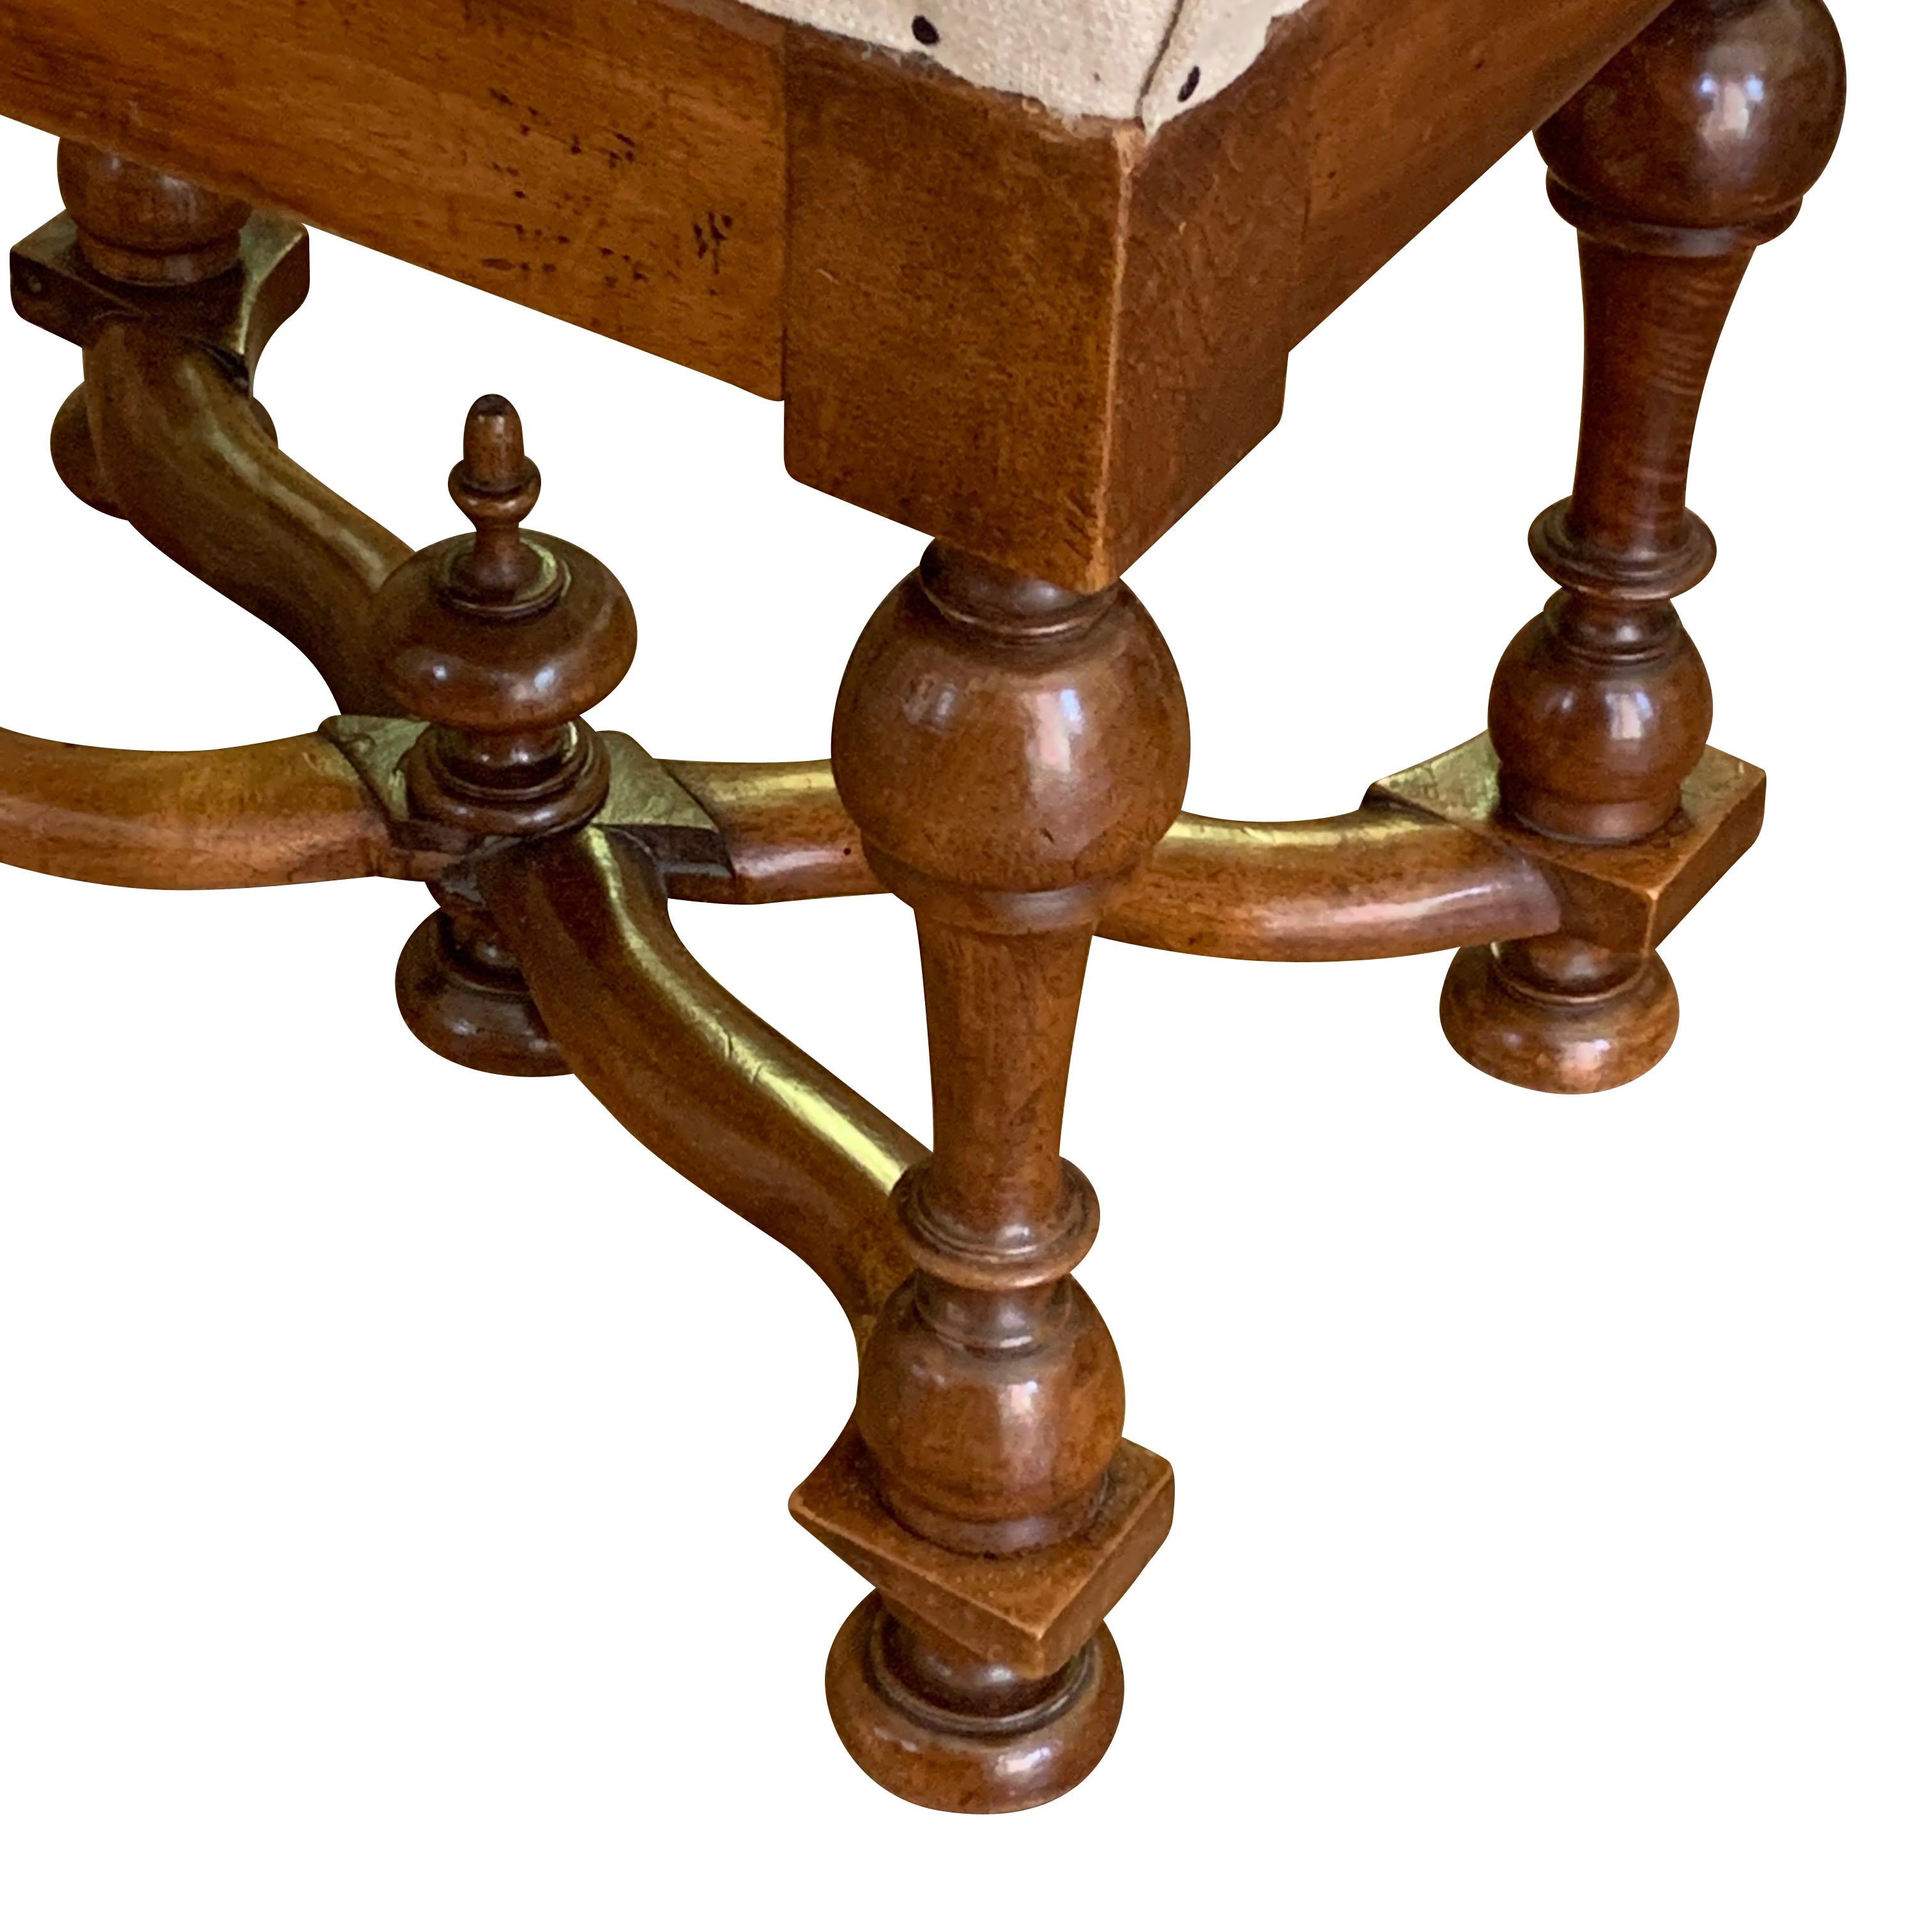 19th century French single foot stool with center finial
Newly reupholstered in vintage Belgian linen
Walnut wood.